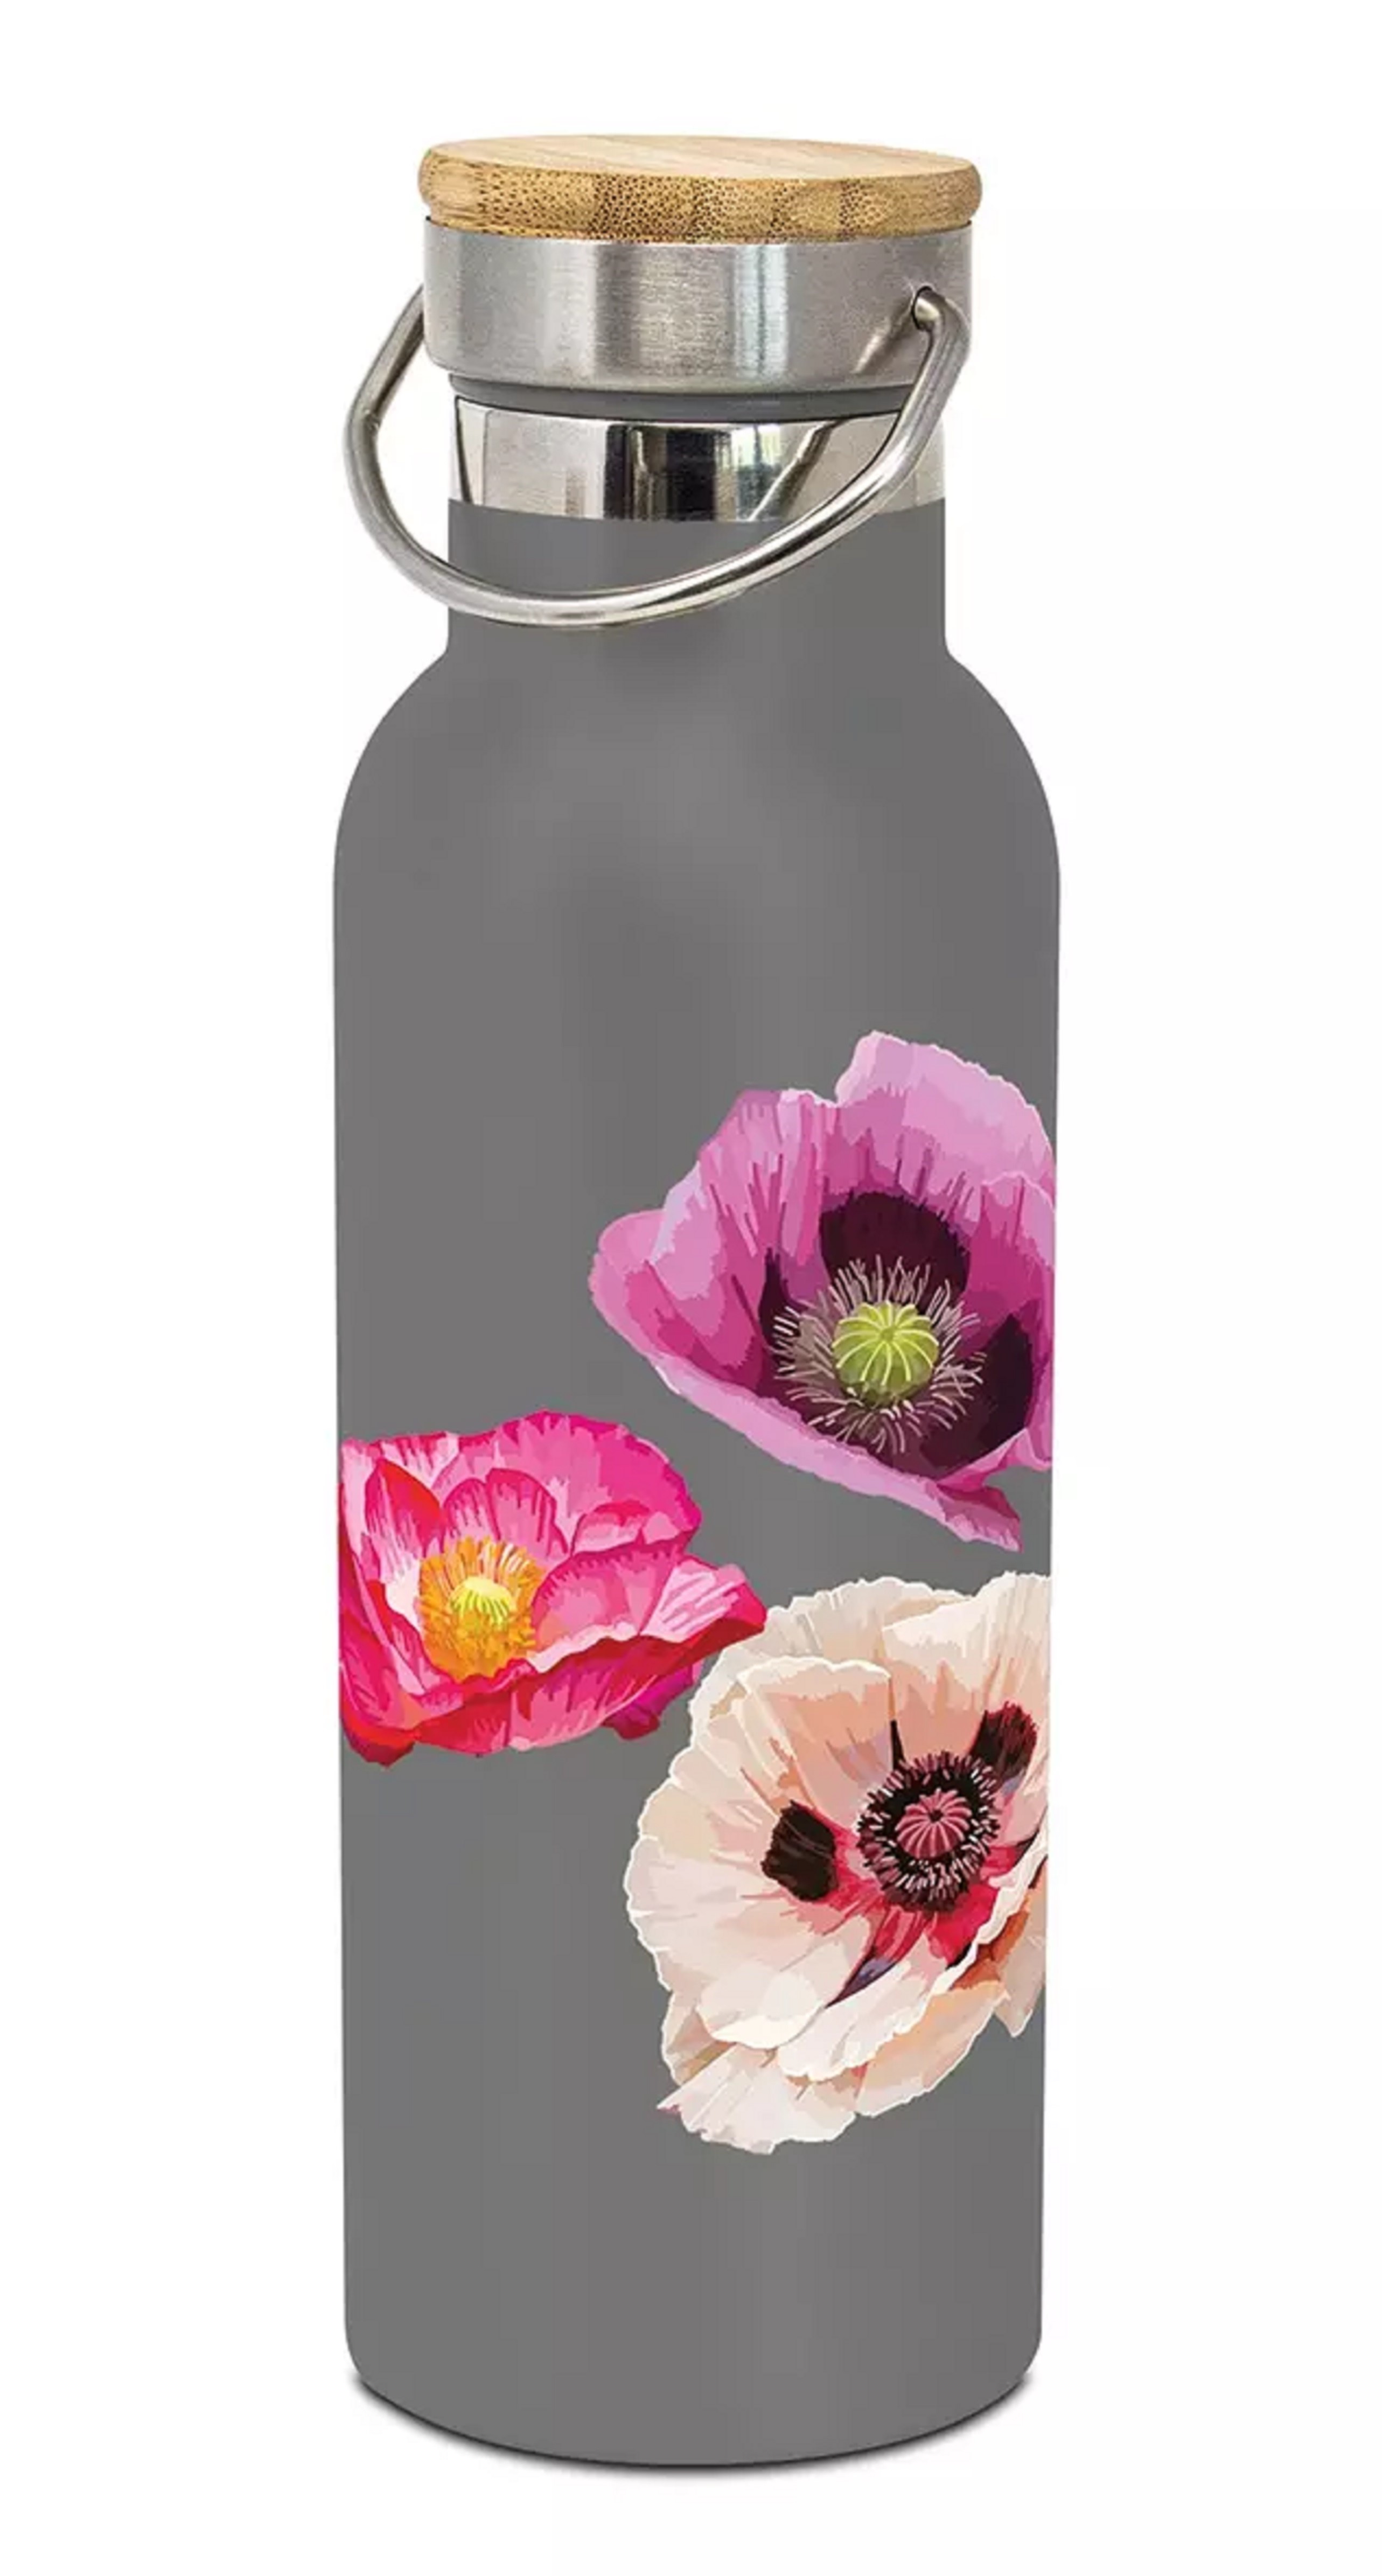 Termos - Fabulous Poppies 500ml | Paperproducts Design